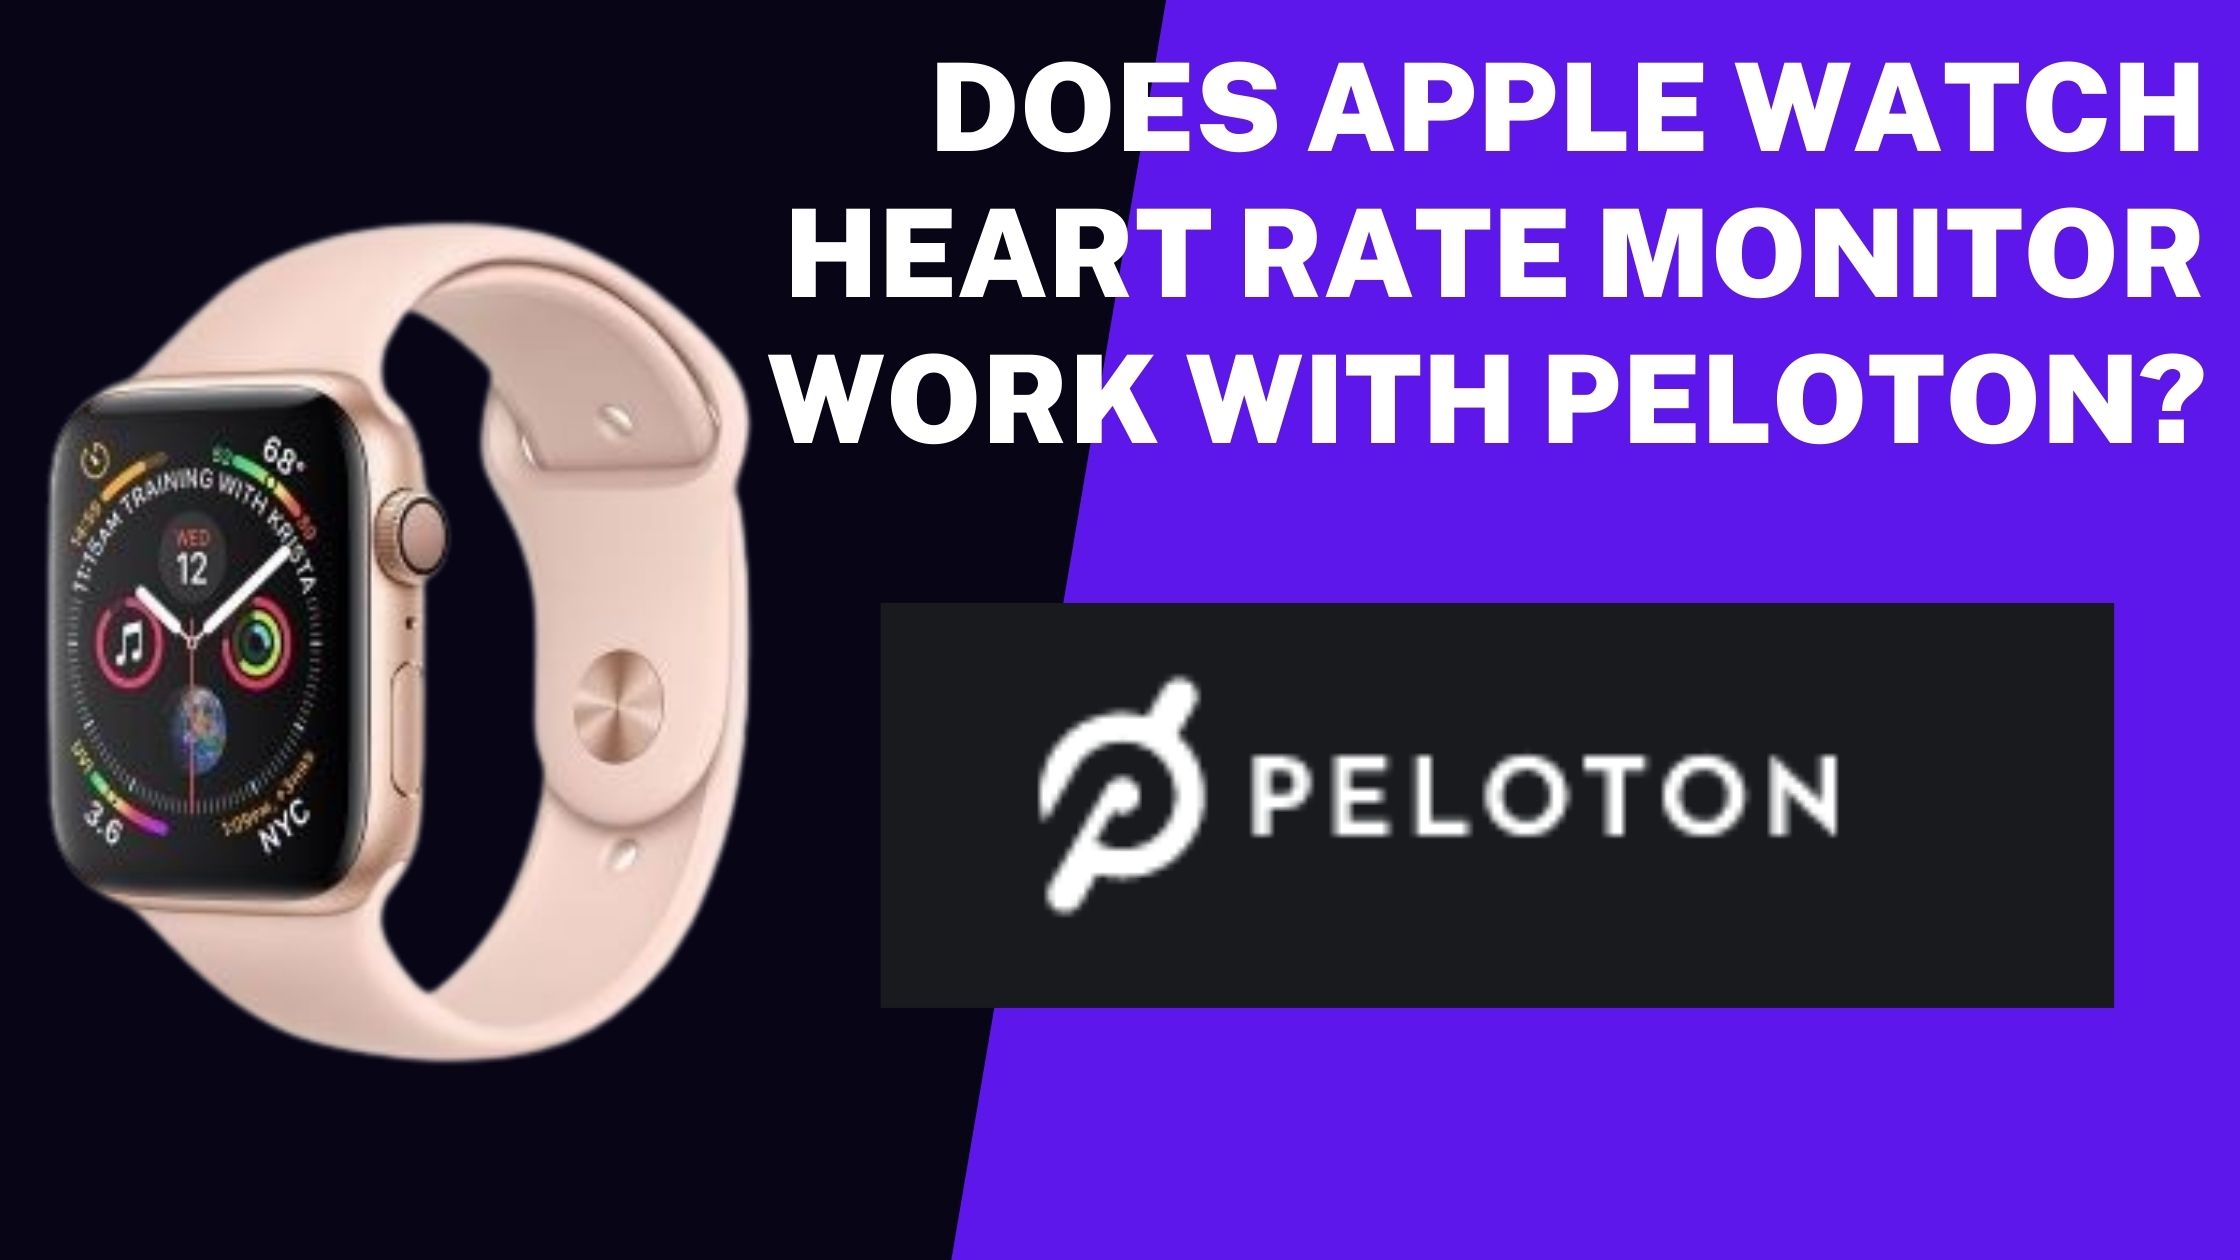 Does Apple Watch Heart Rate Monitor work with Peloton